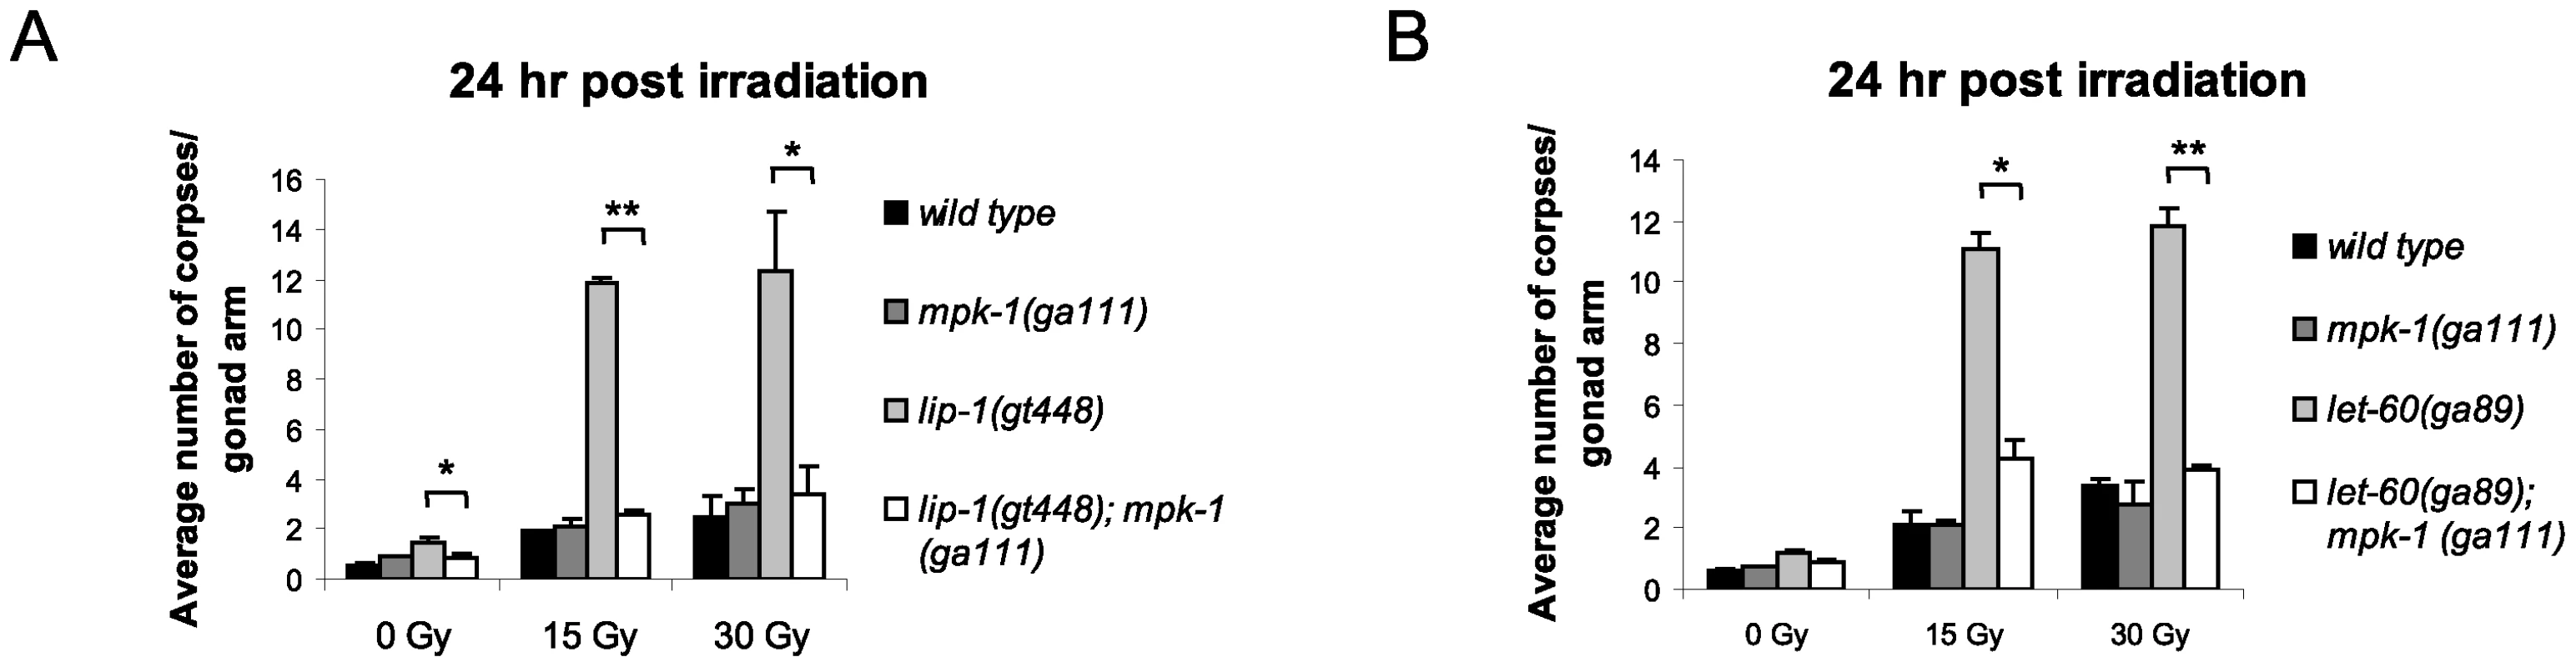 The enhanced apoptosis in <i>lip-1(gt448)</i> and <i>let-60(ga89)</i> mutant worms is due to enhanced MPK-1 activity.